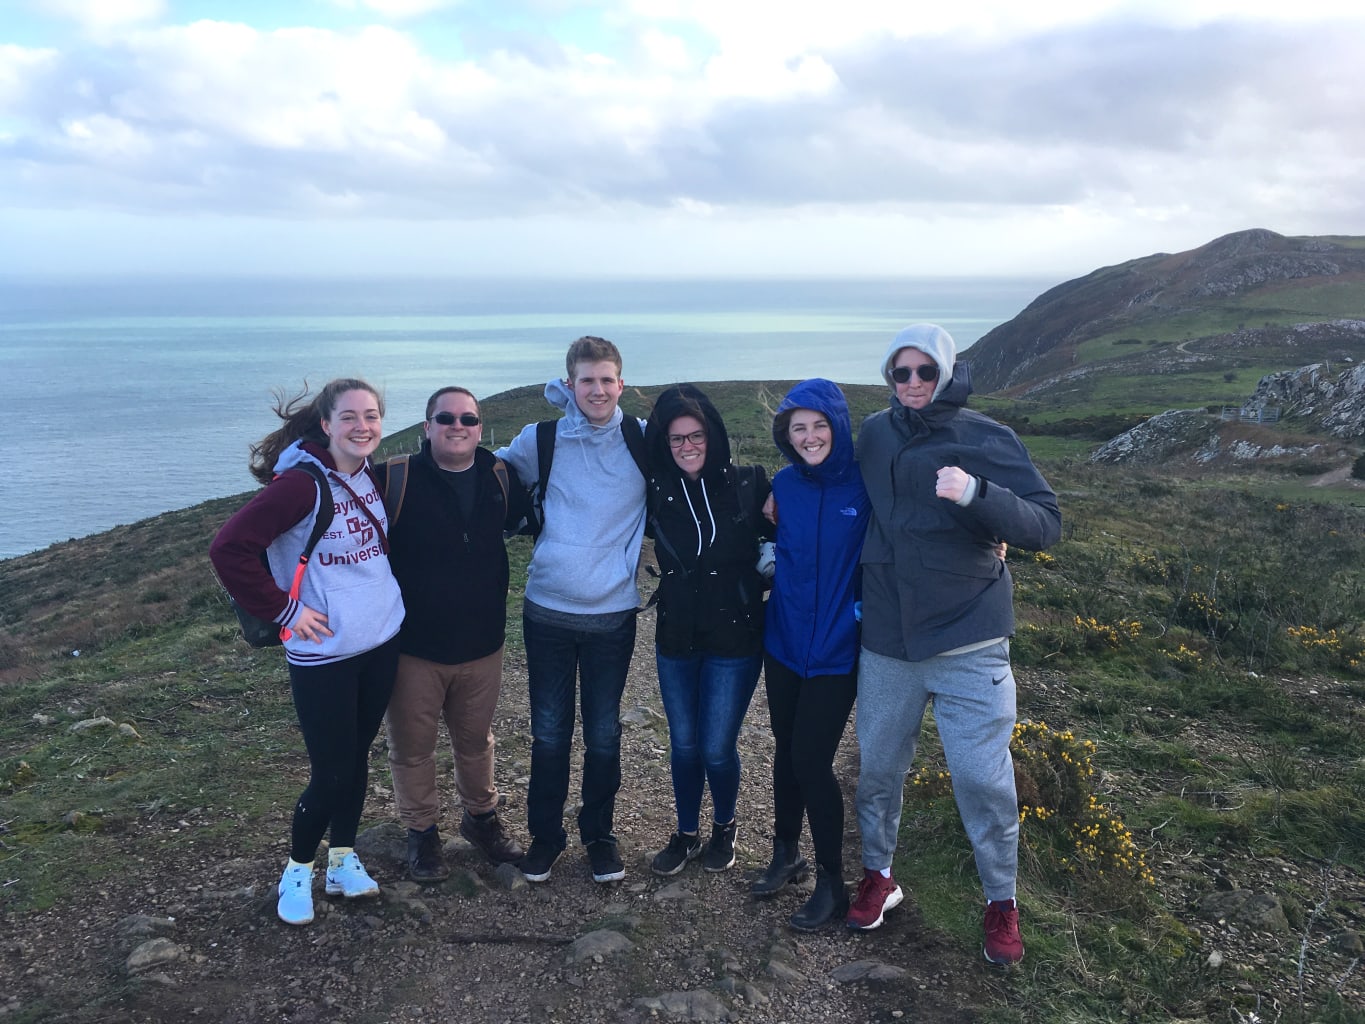 A group of students on a hill overlooking the ocean in Maynooth, Ireland.